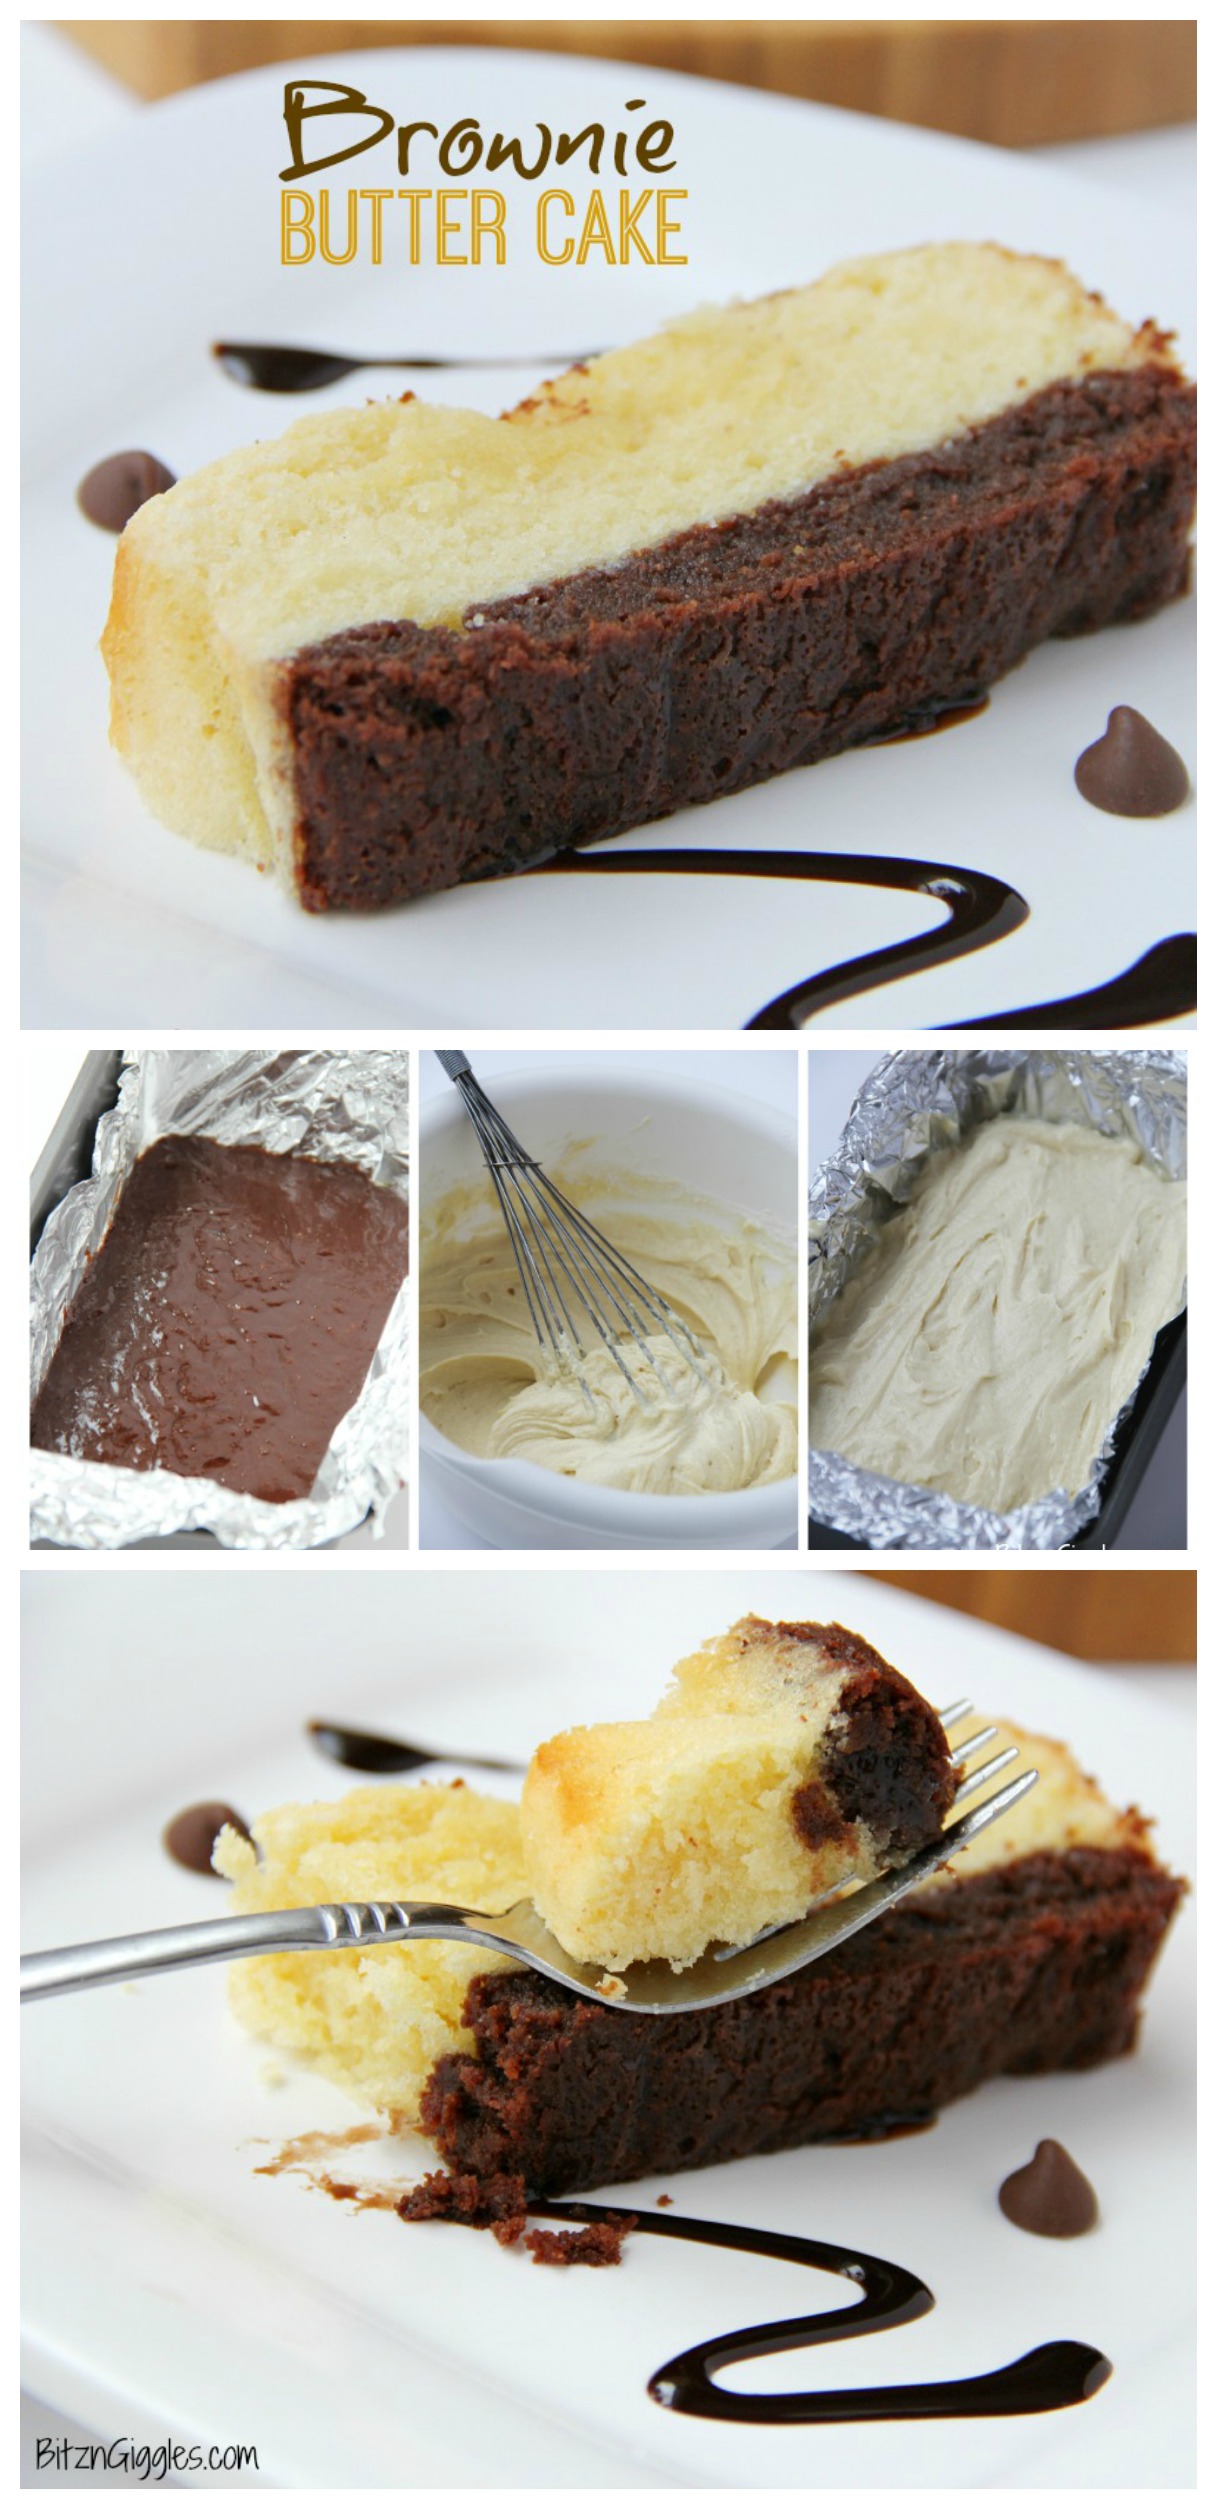 A moist, sweet, layered loaf cake - perfect for entertaining!